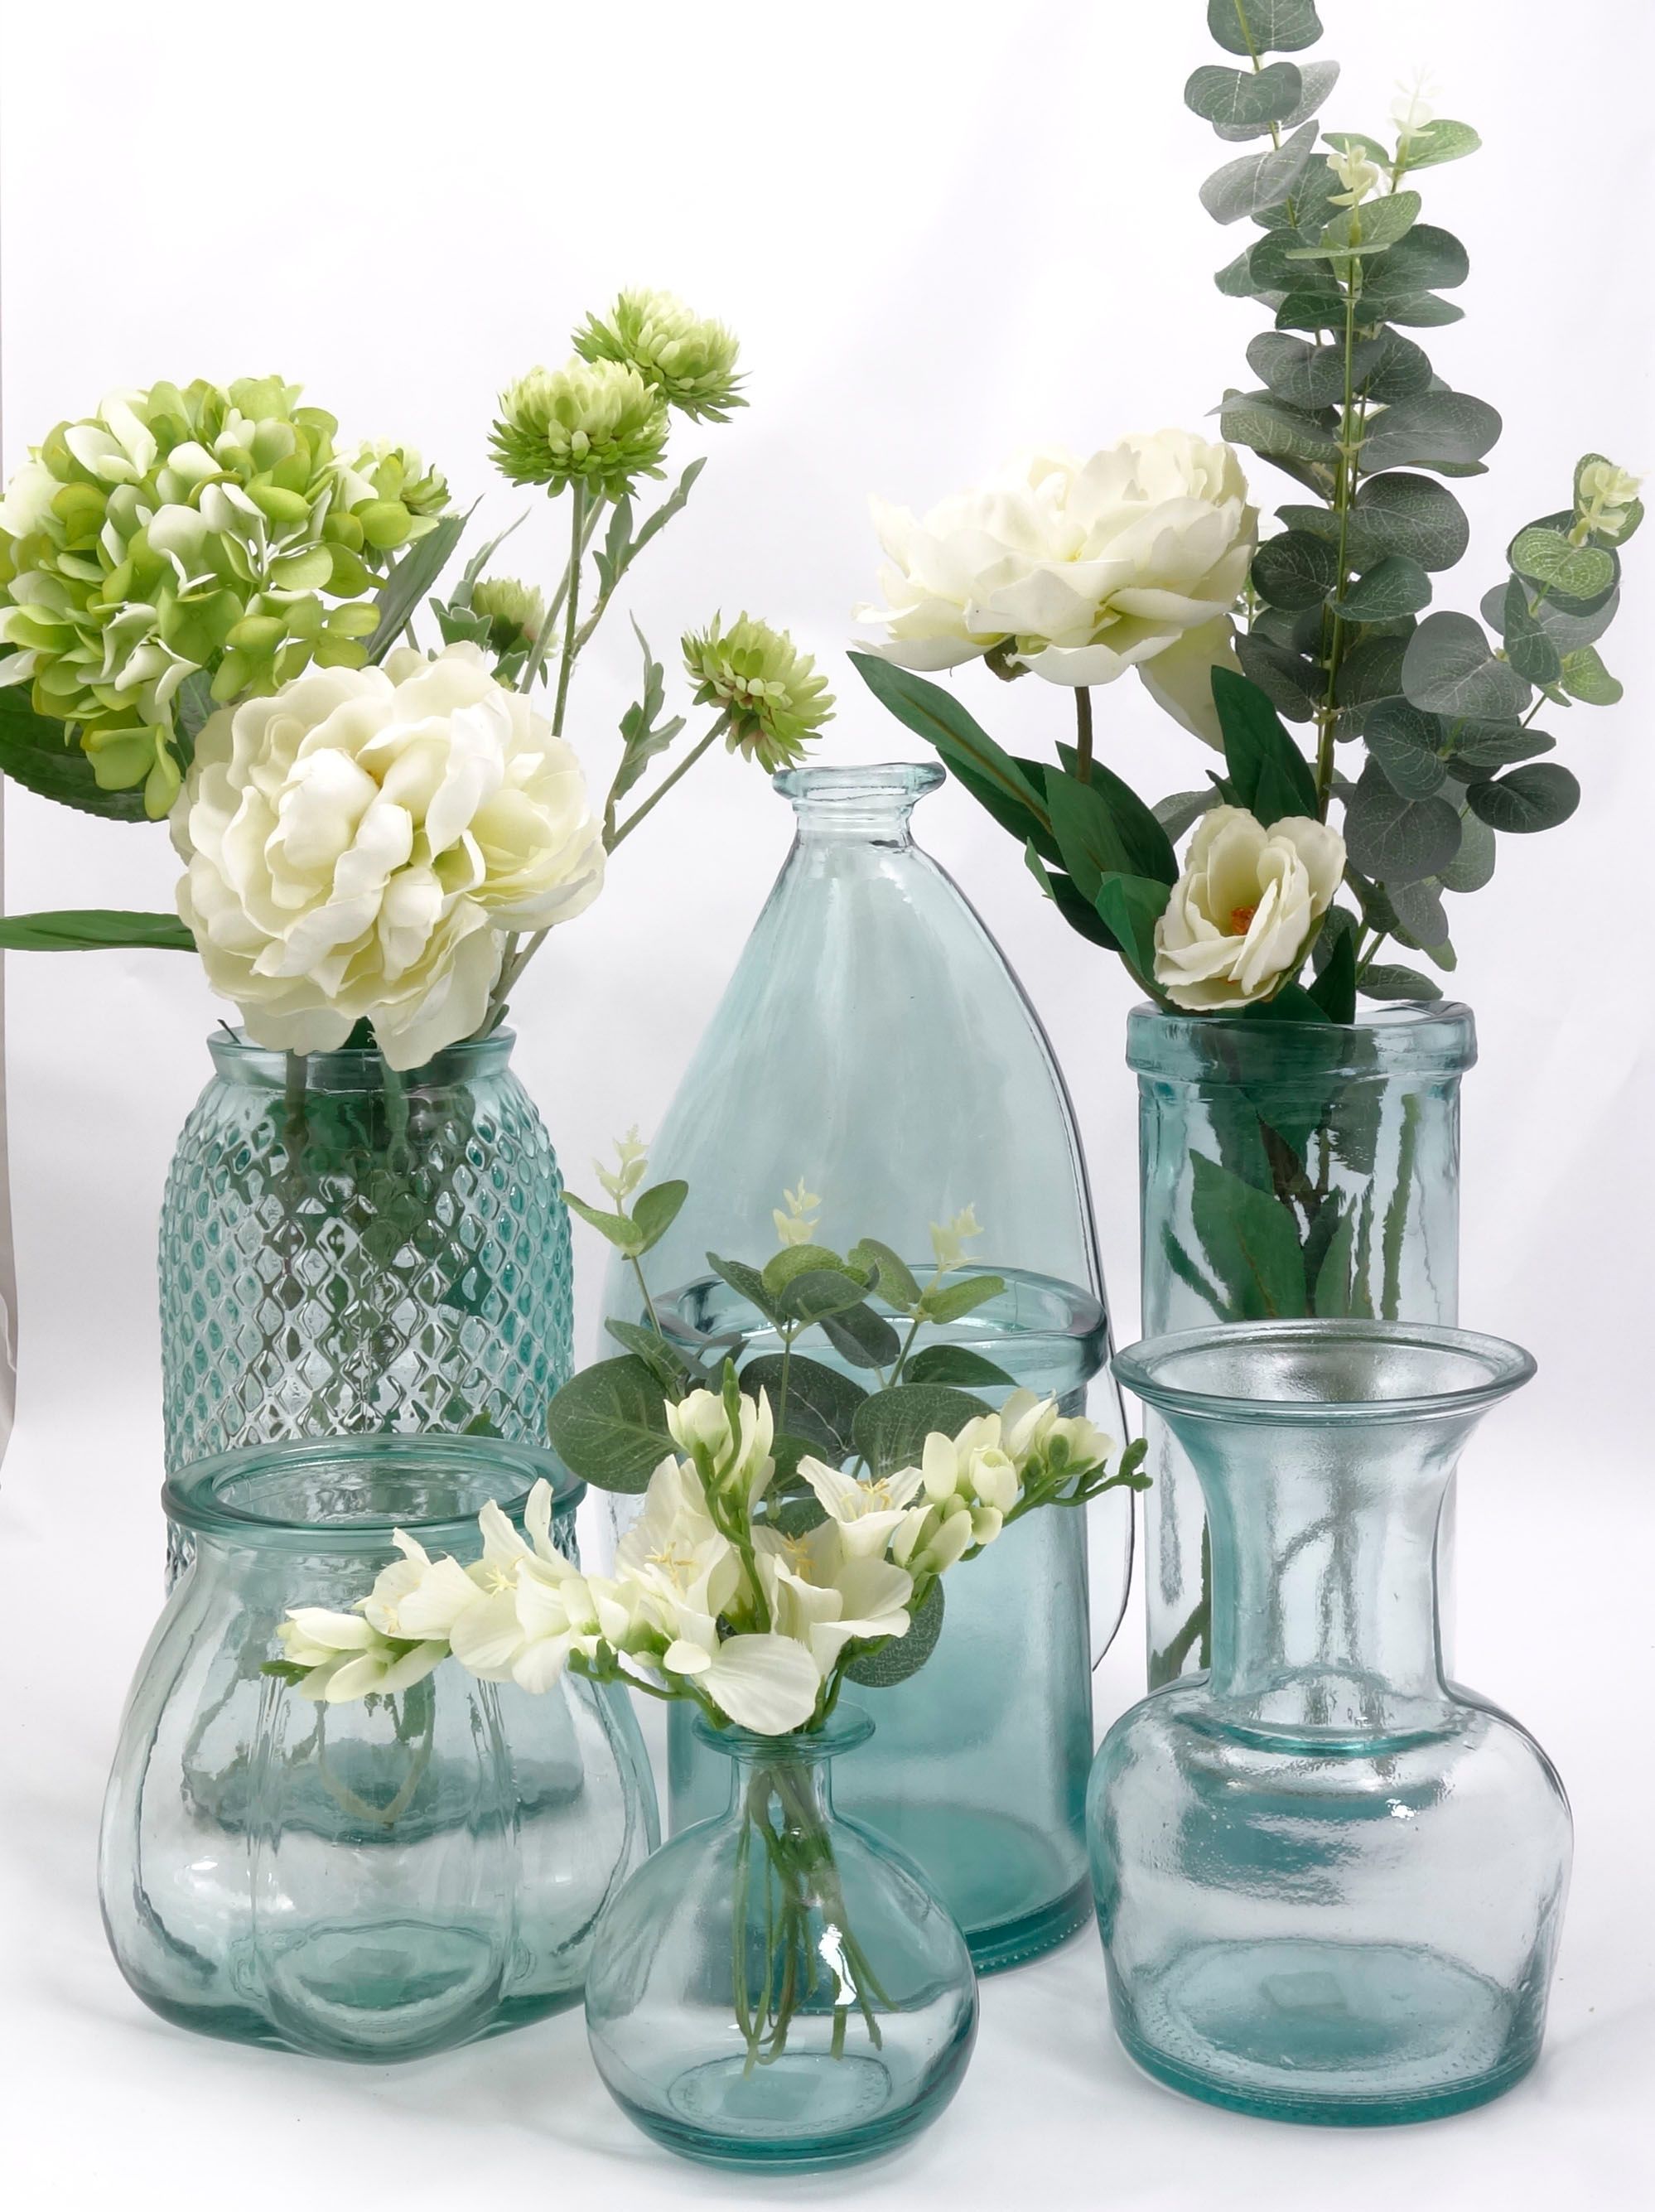 Recycled glass vases